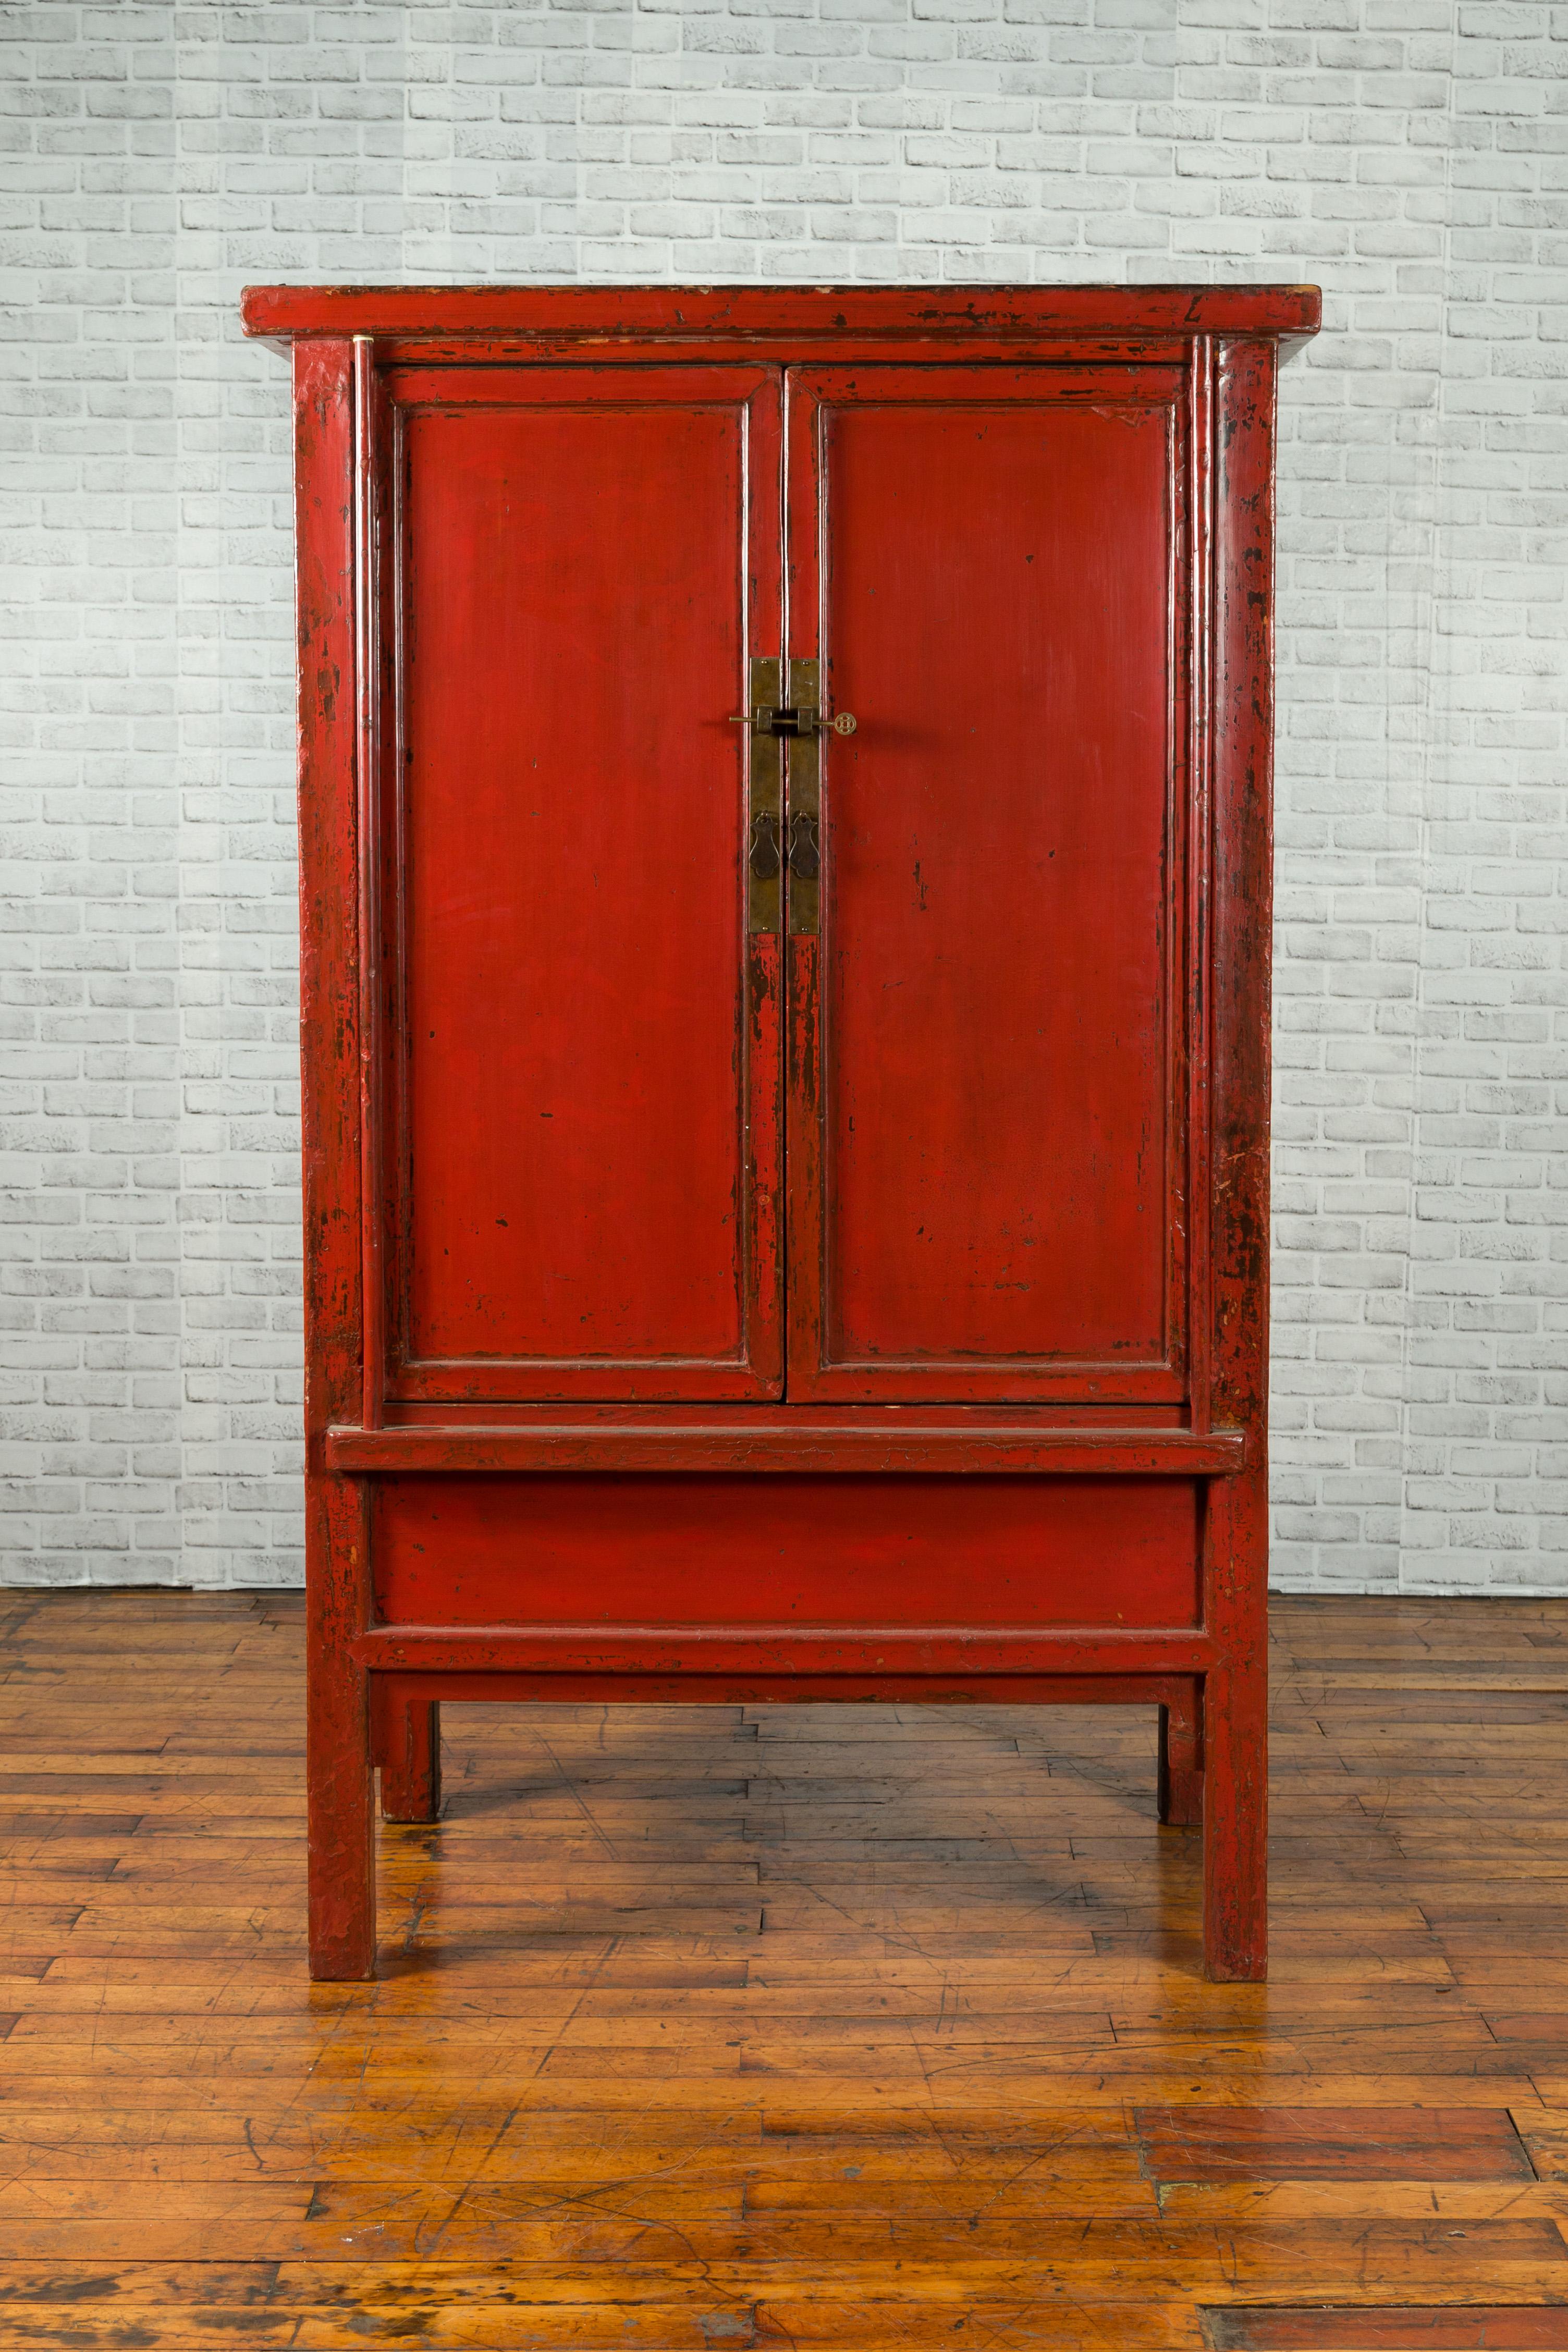 A North-Eastern Chinese Qing Dynasty 19th century elmwood cabinet from Shanxi with two doors and original red lacquer. Created in China during the Qing Dynasty, this red lacquered cabinet features two simple doors opening thanks to a brass lock to